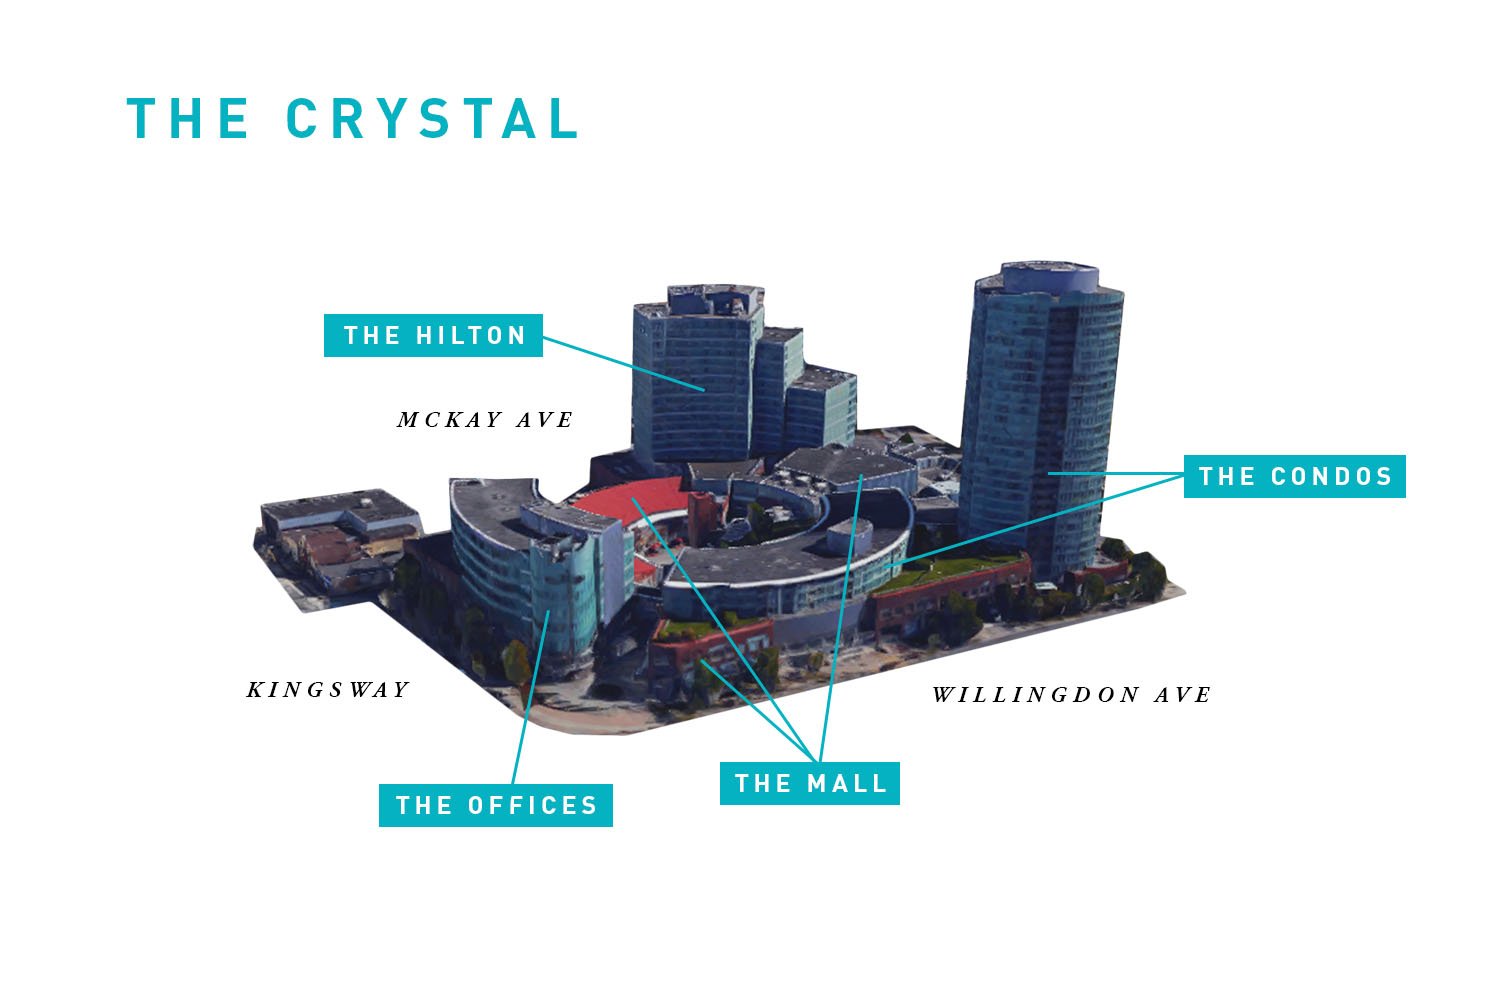 A digital rendering of Crystal Mall uses turquoise and blue colourways to depict a full-colour digital rendering of the mall and its surrounding towers.